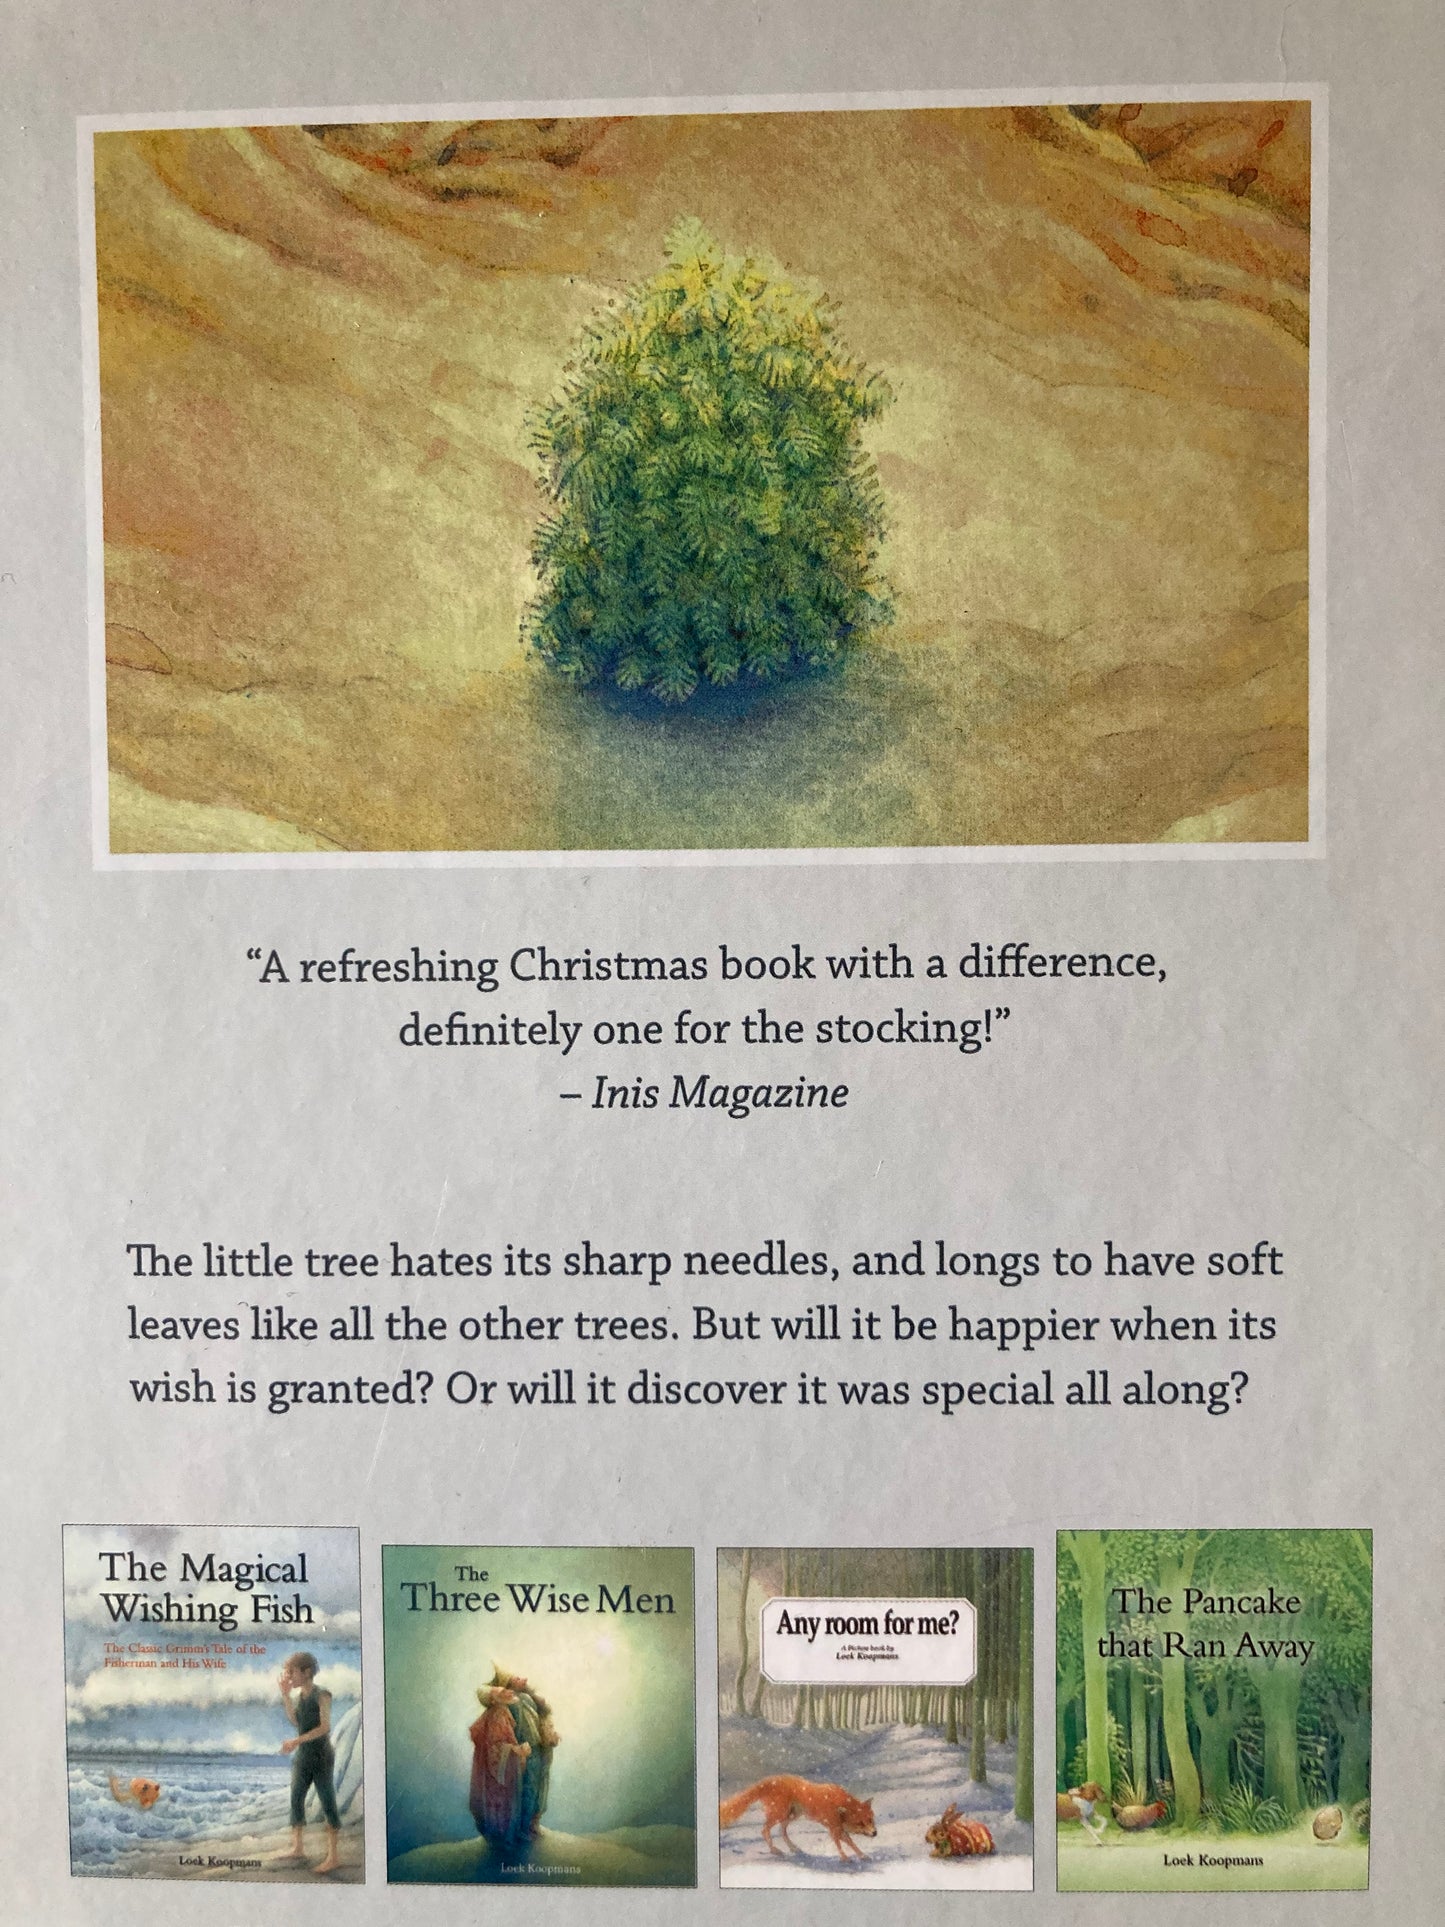 Children’s Picture Book - THE LITTLE CHRISTMAS TREE